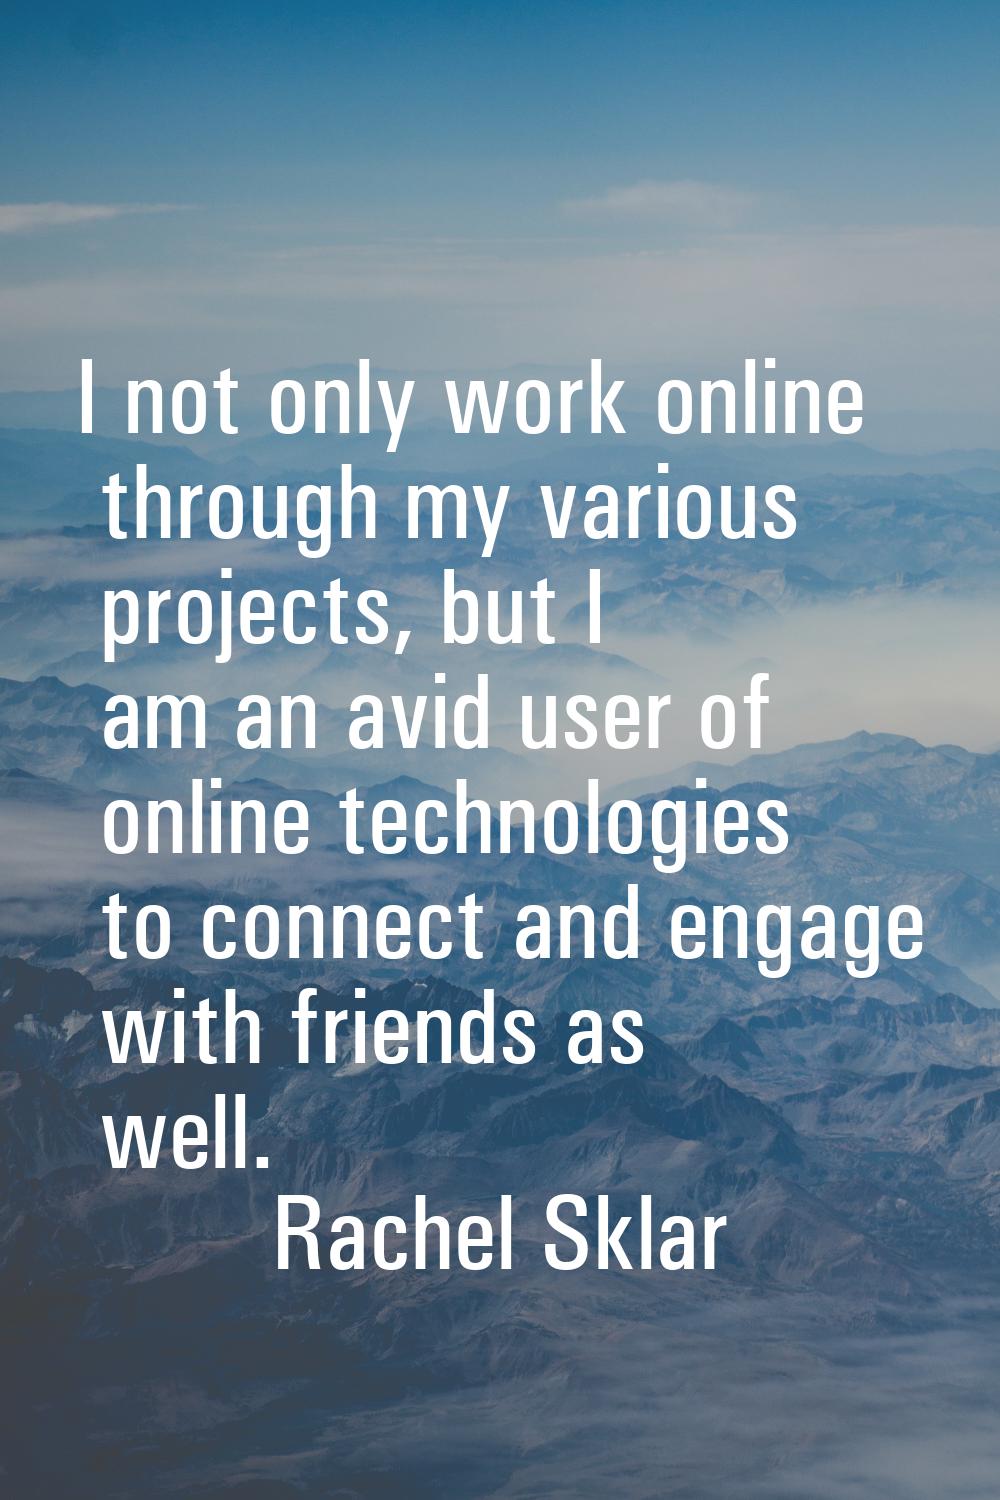 I not only work online through my various projects, but I am an avid user of online technologies to